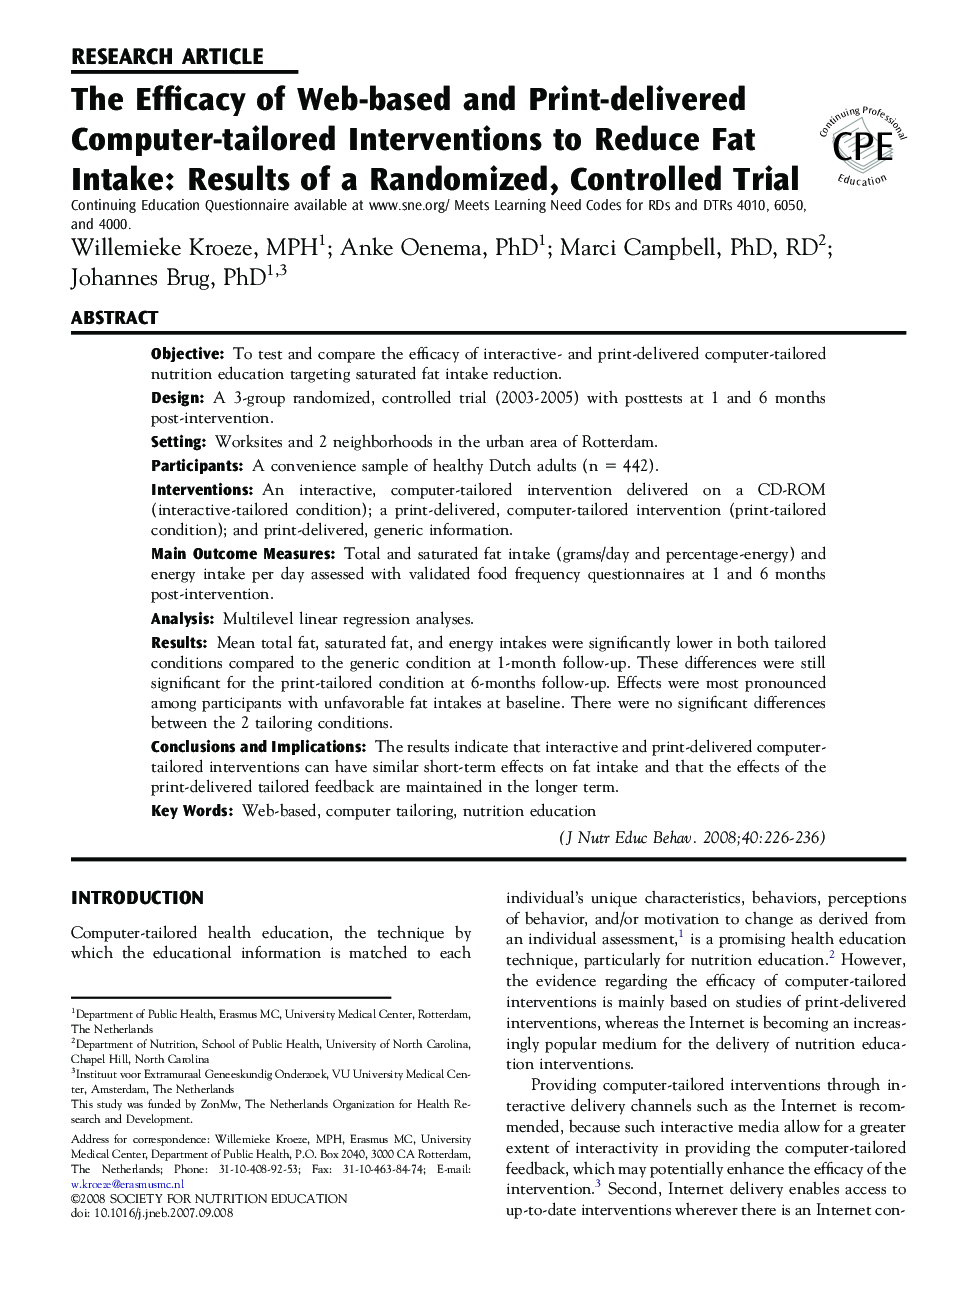 The Efficacy of Web-based and Print-delivered Computer-tailored Interventions to Reduce Fat Intake: Results of a Randomized, Controlled Trial 